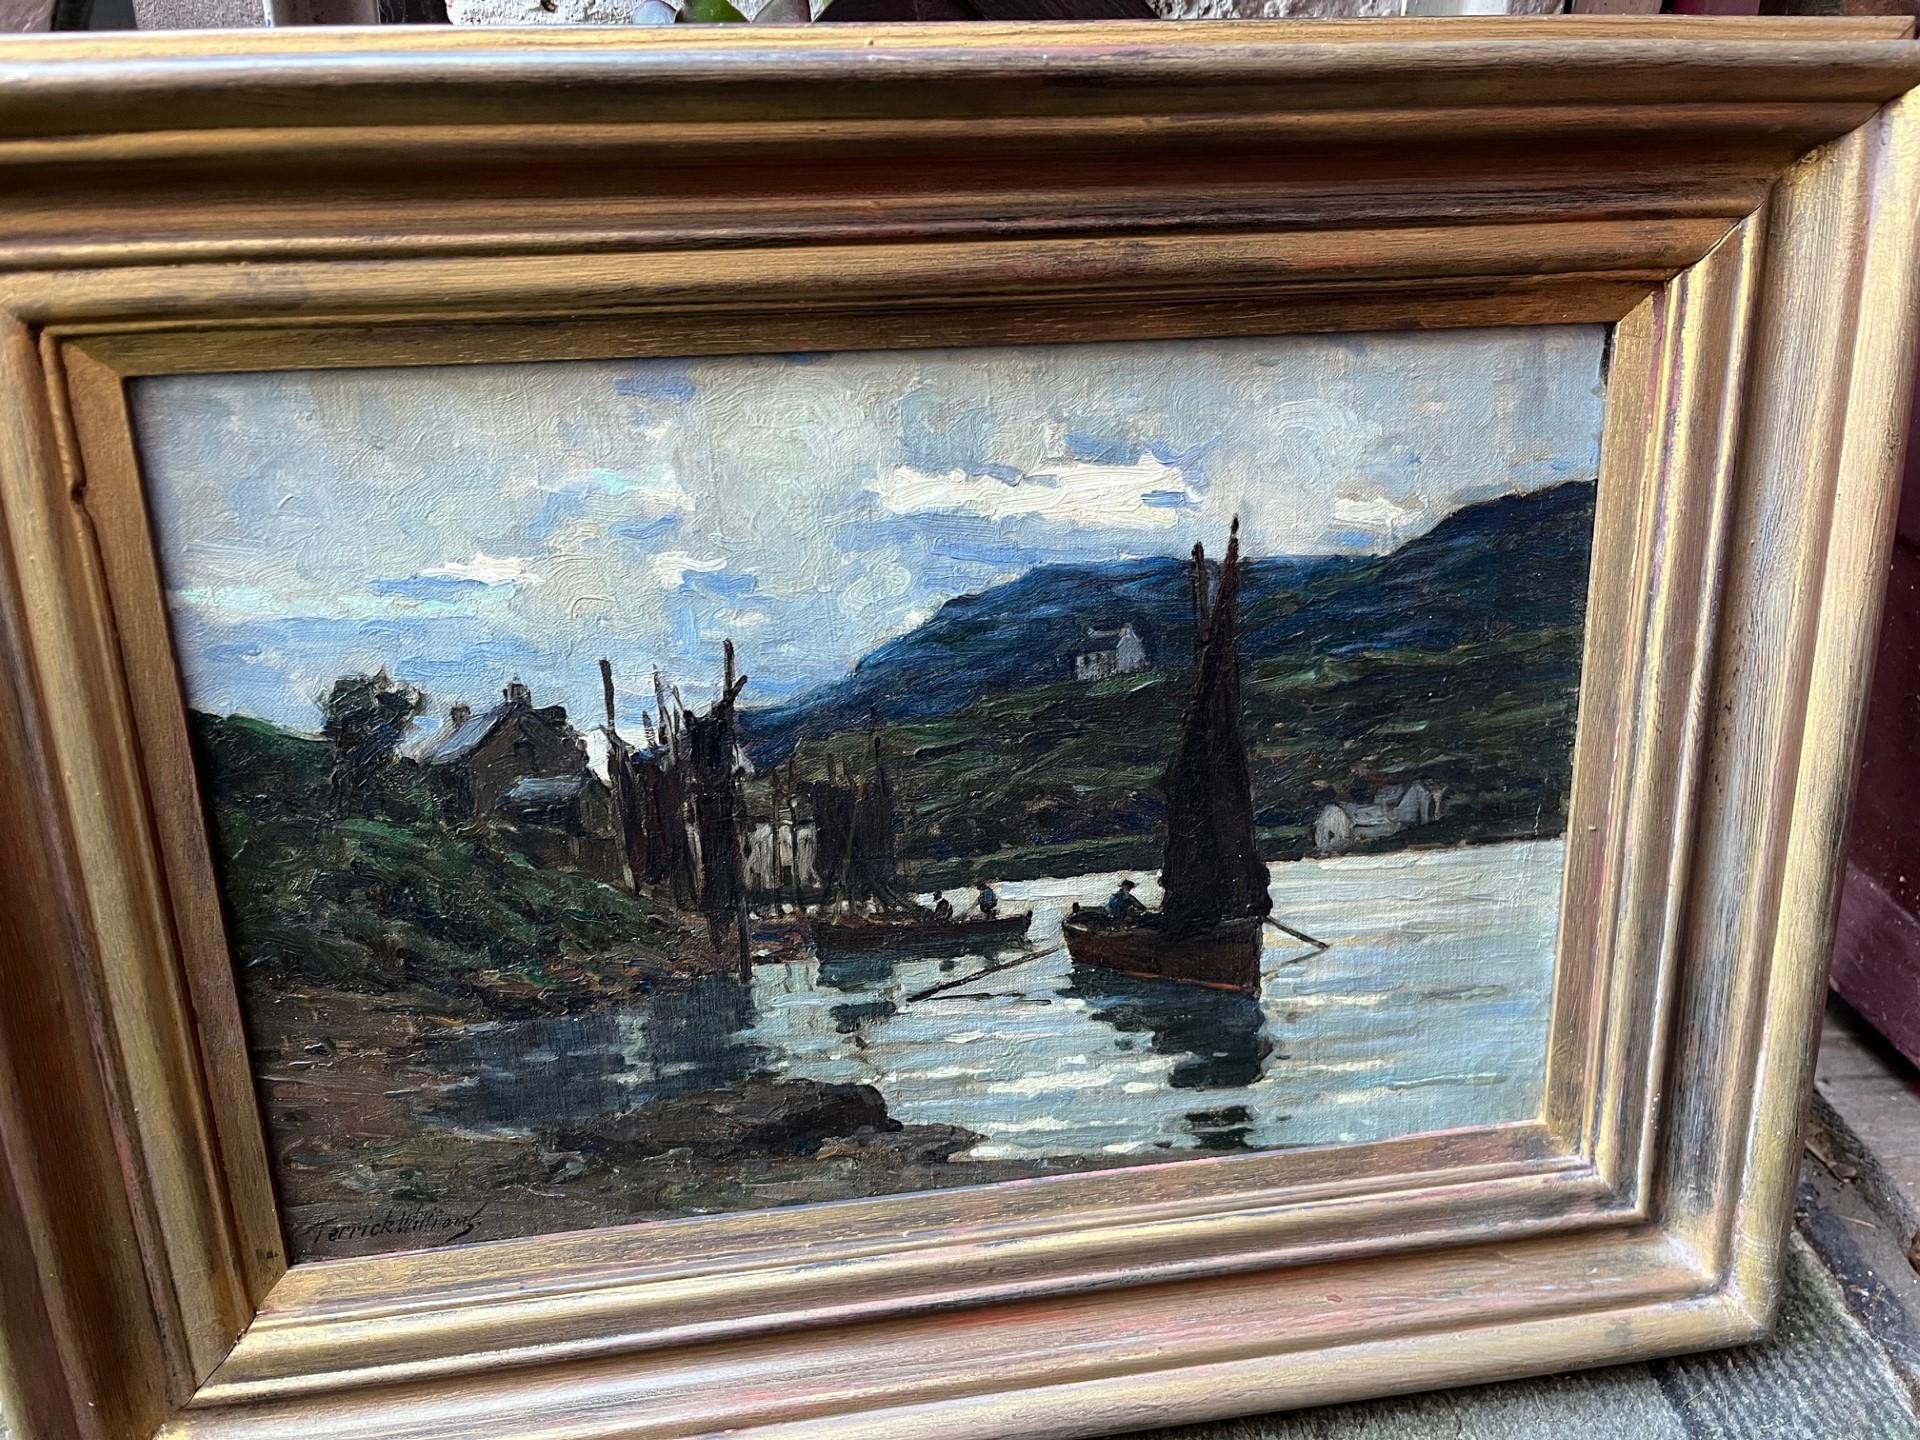  Loch Fyne Scottish Landscape. Boats in harbour with hills beyond oil, Painting